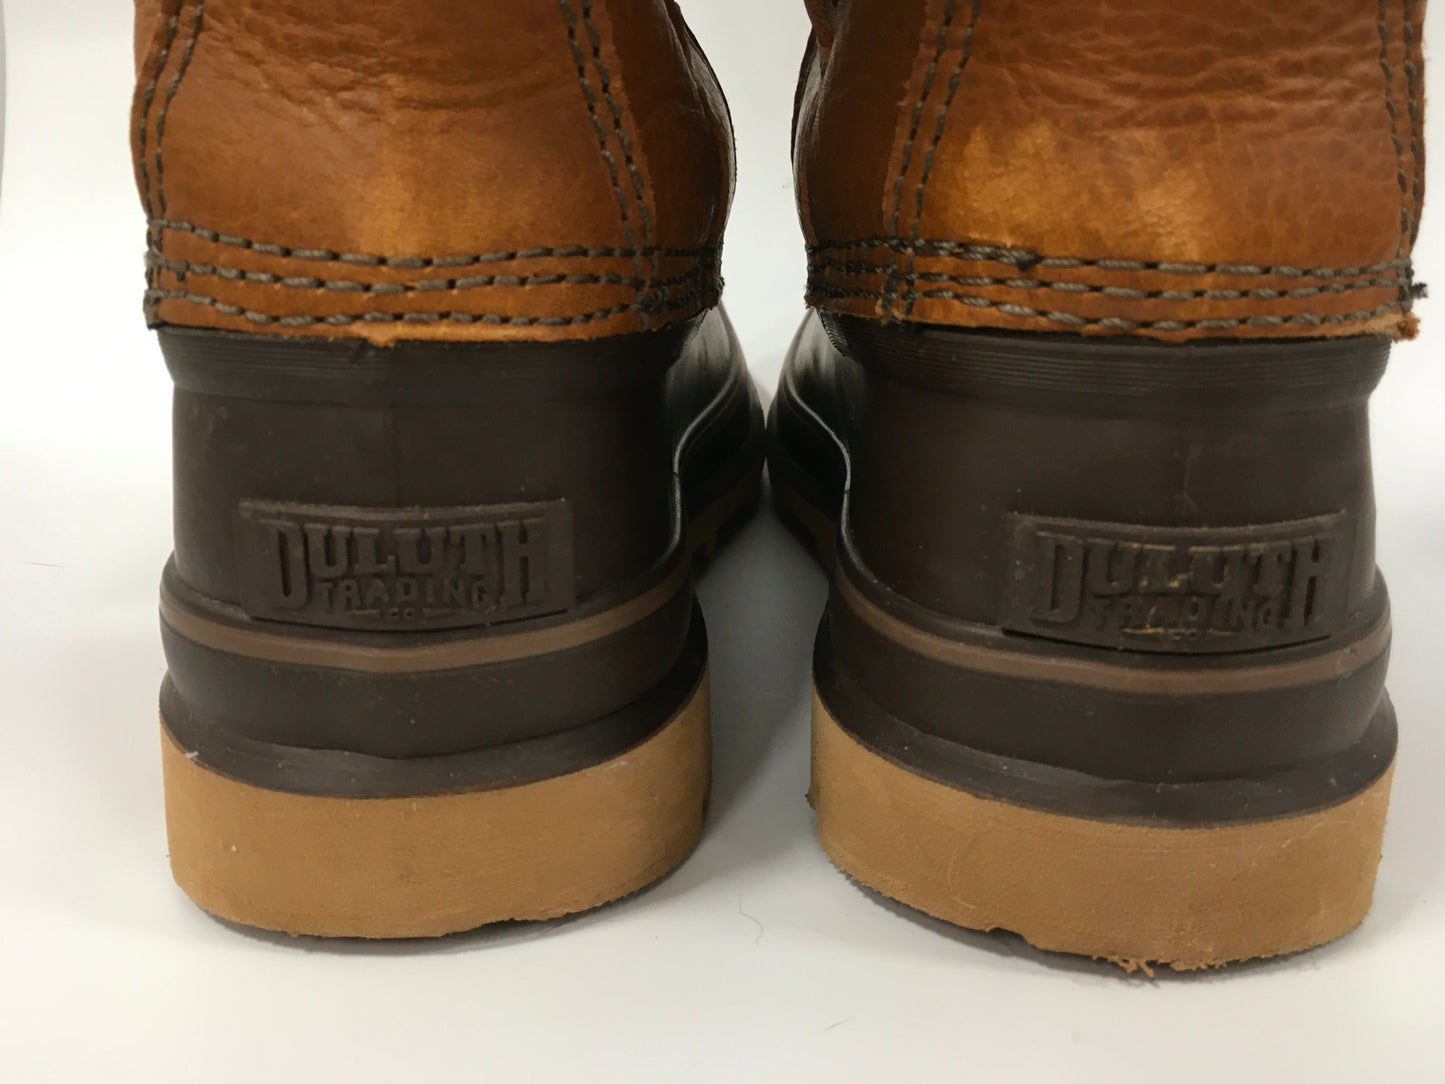 Brown Boots Snow Duluth Trading, Size 9.5